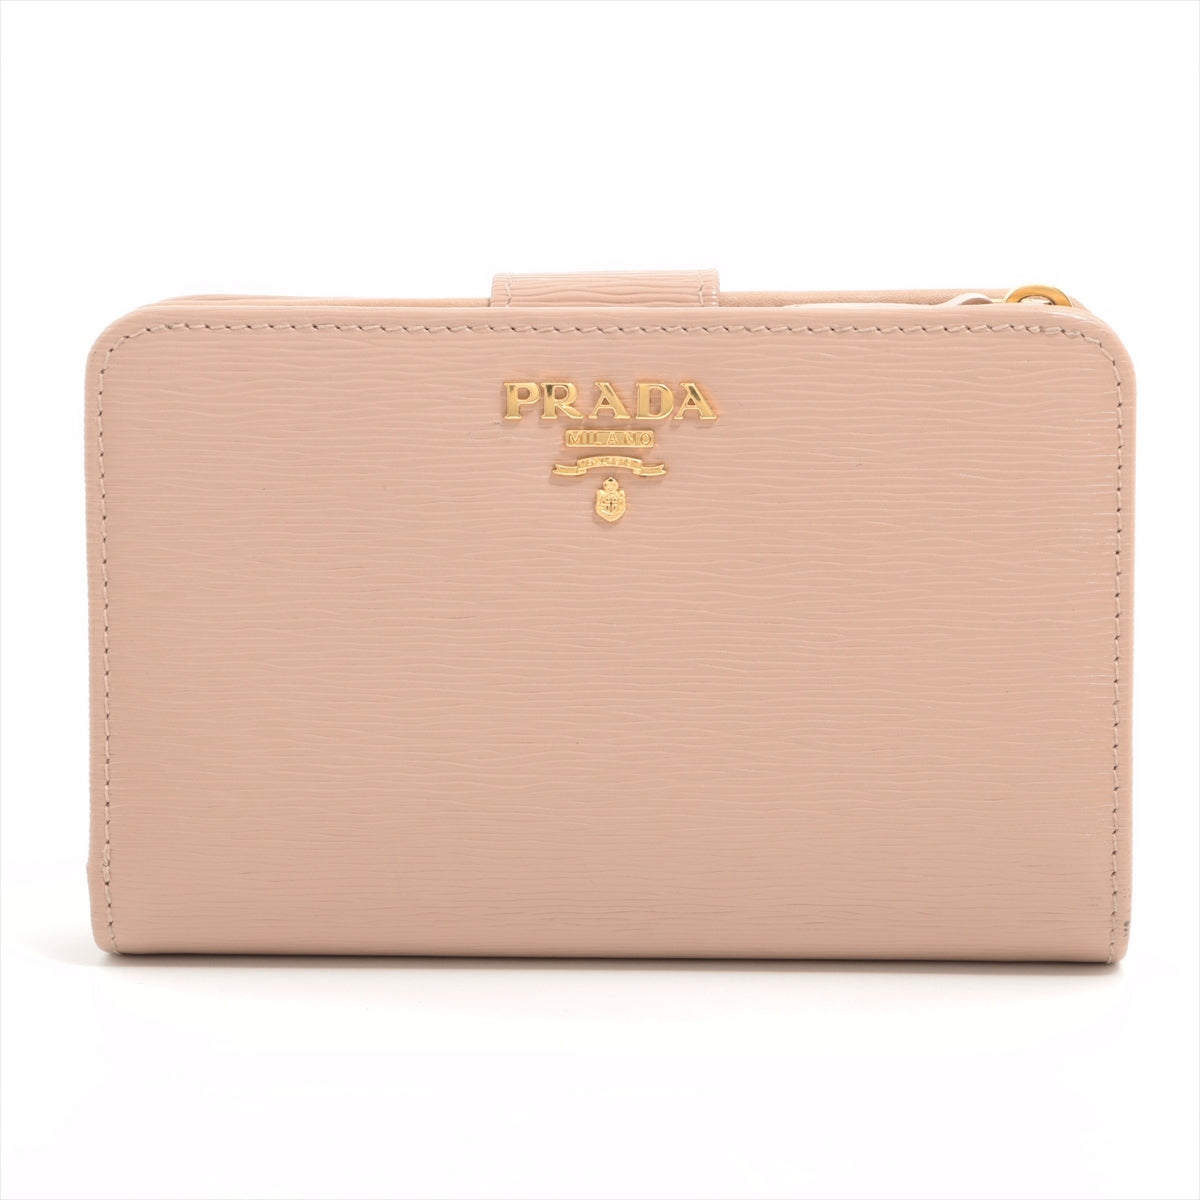 Prada Vitello Move 1ML225 Leather Wallet Beige There is dirt in the pocket